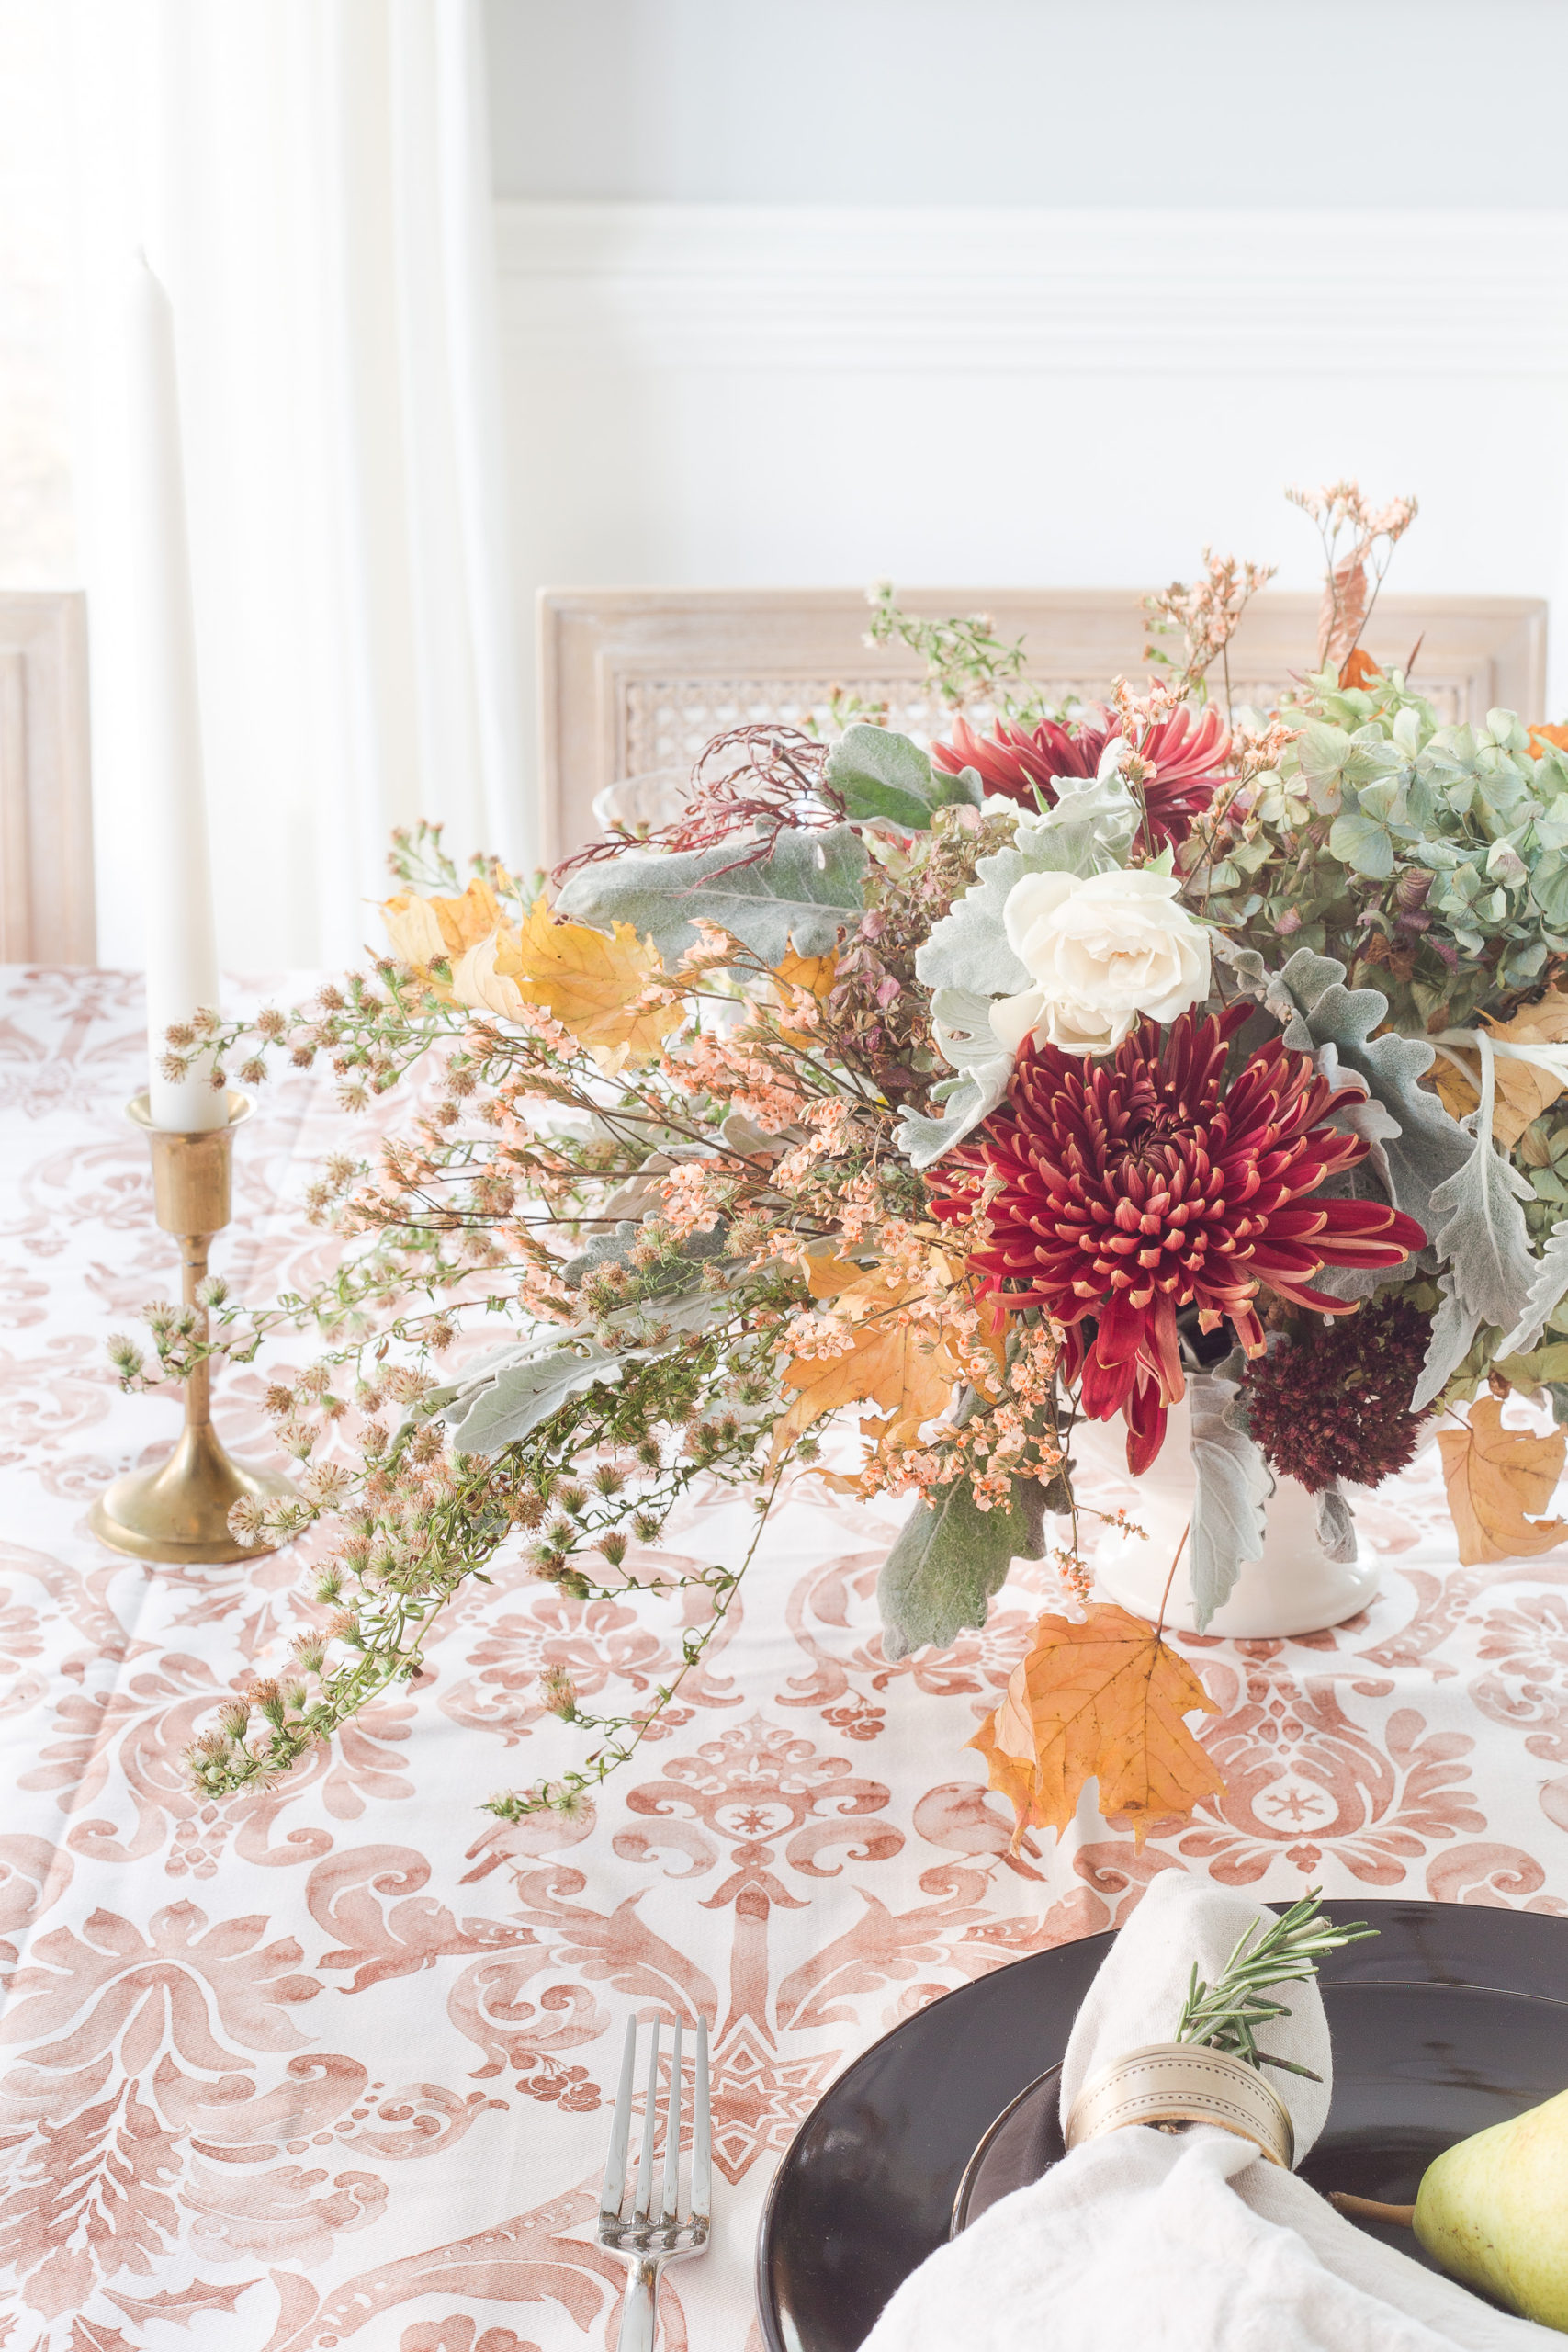 DIY Floral Centerpiece with $10 Grocery Store Flowers